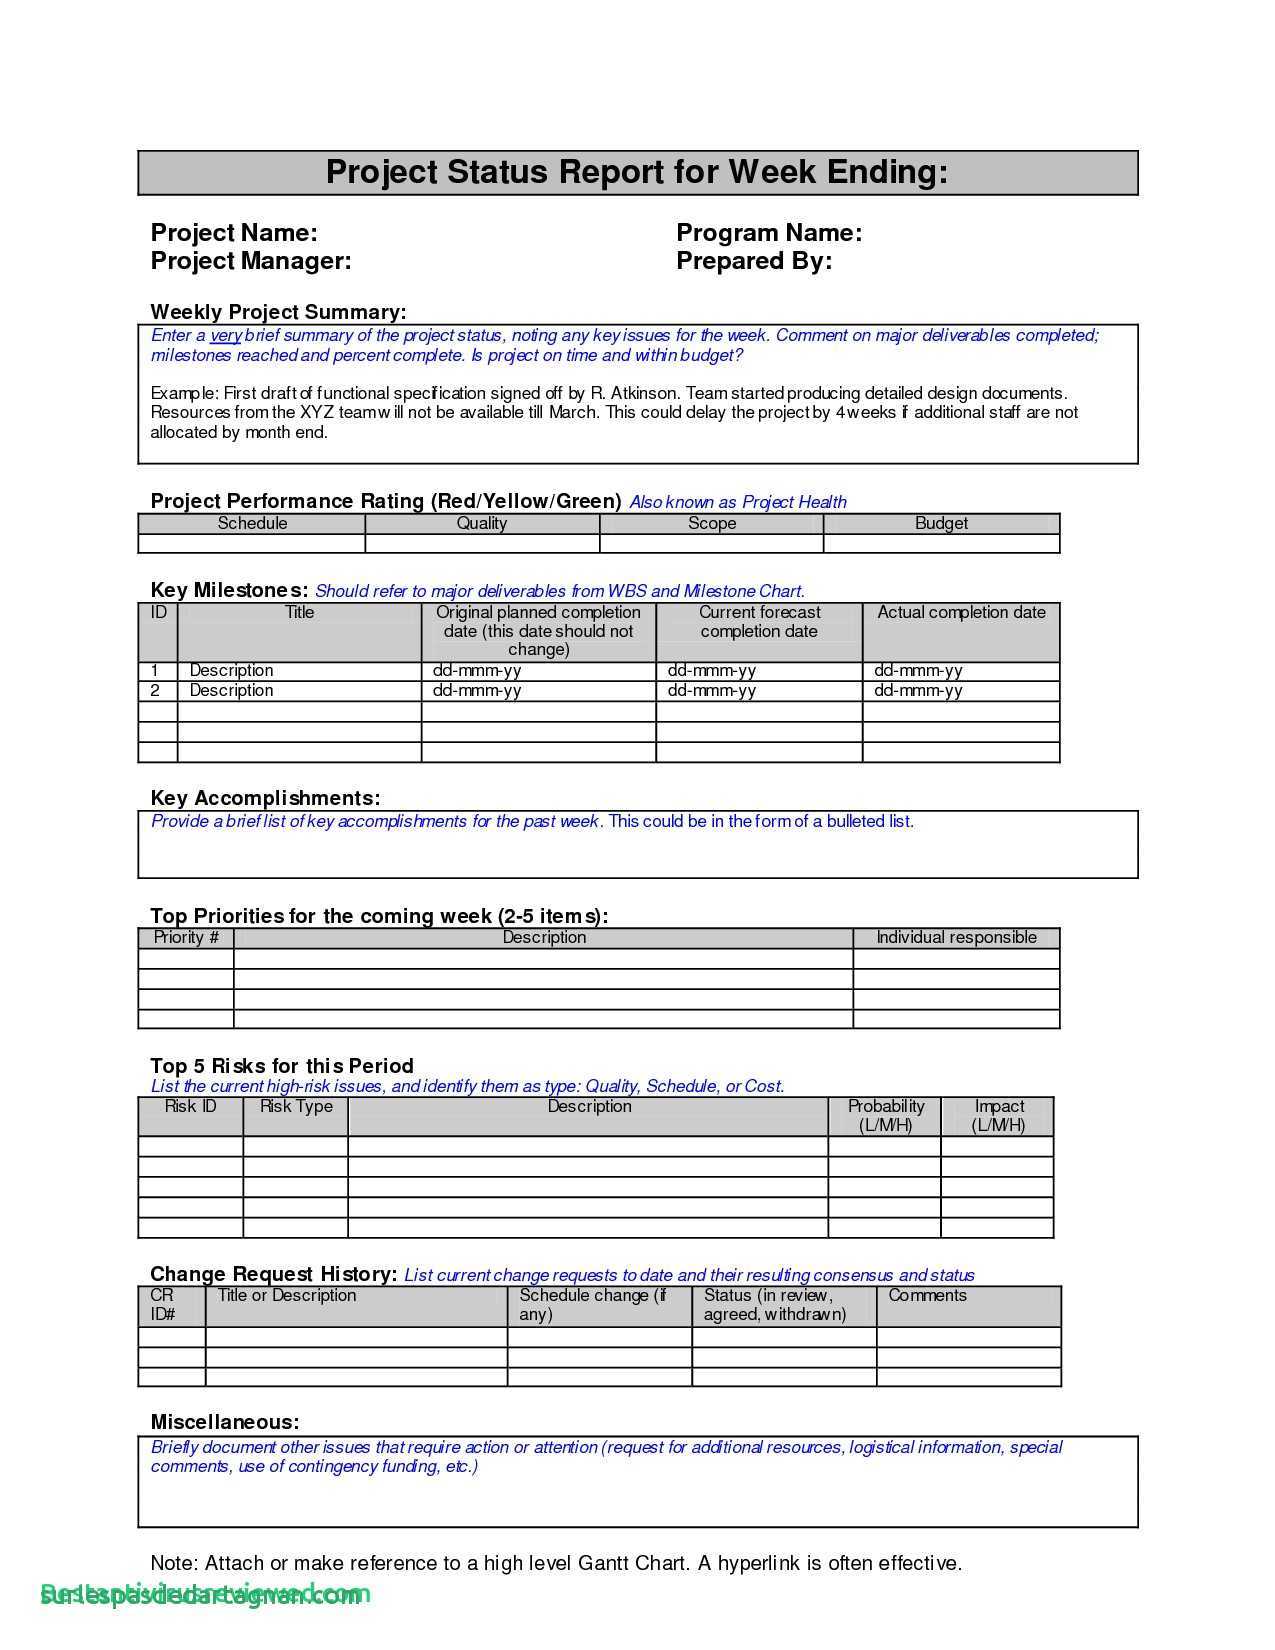 12 Conflict Minerals Reporting Template Example | Radaircars Regarding Conflict Minerals Reporting Template